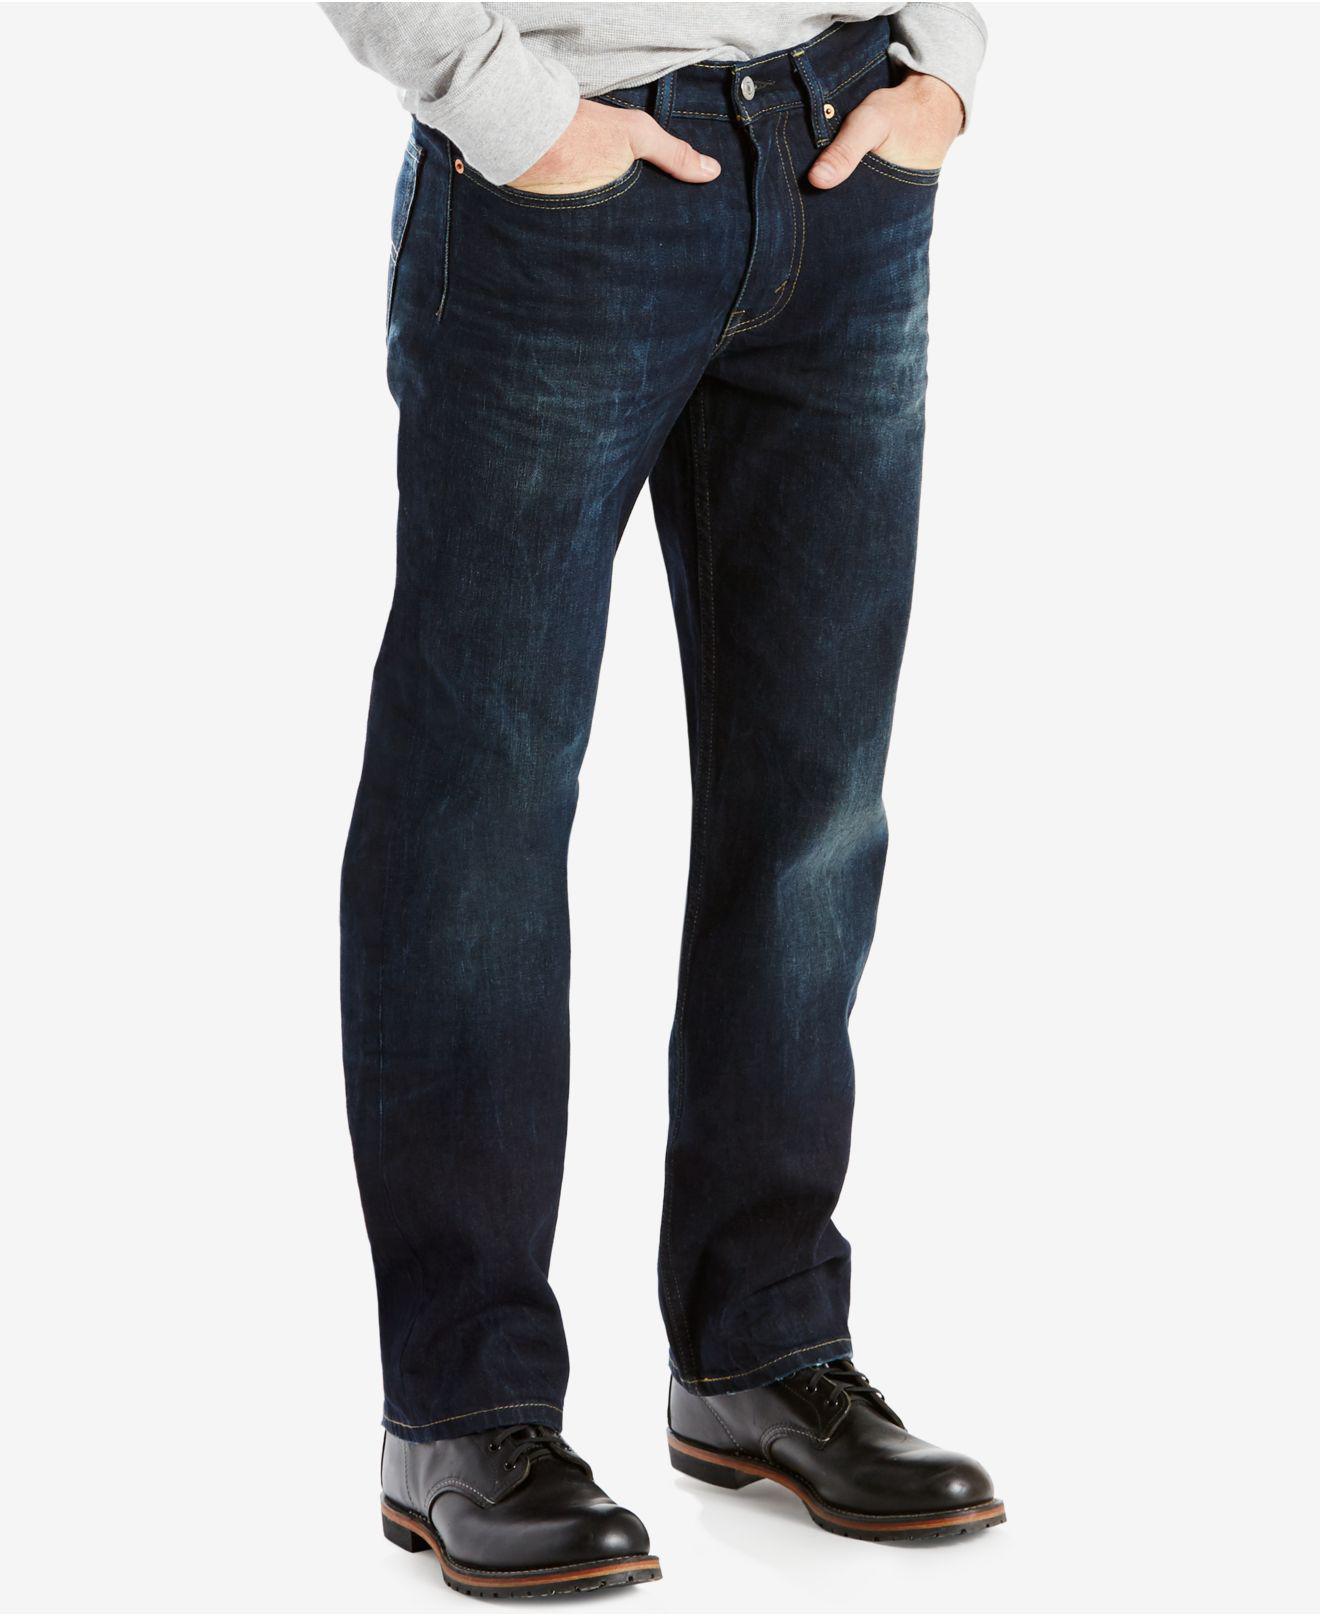 Levi's Denim 514 Straight Fit Jeans in Blue for Men - Save 31% - Lyst